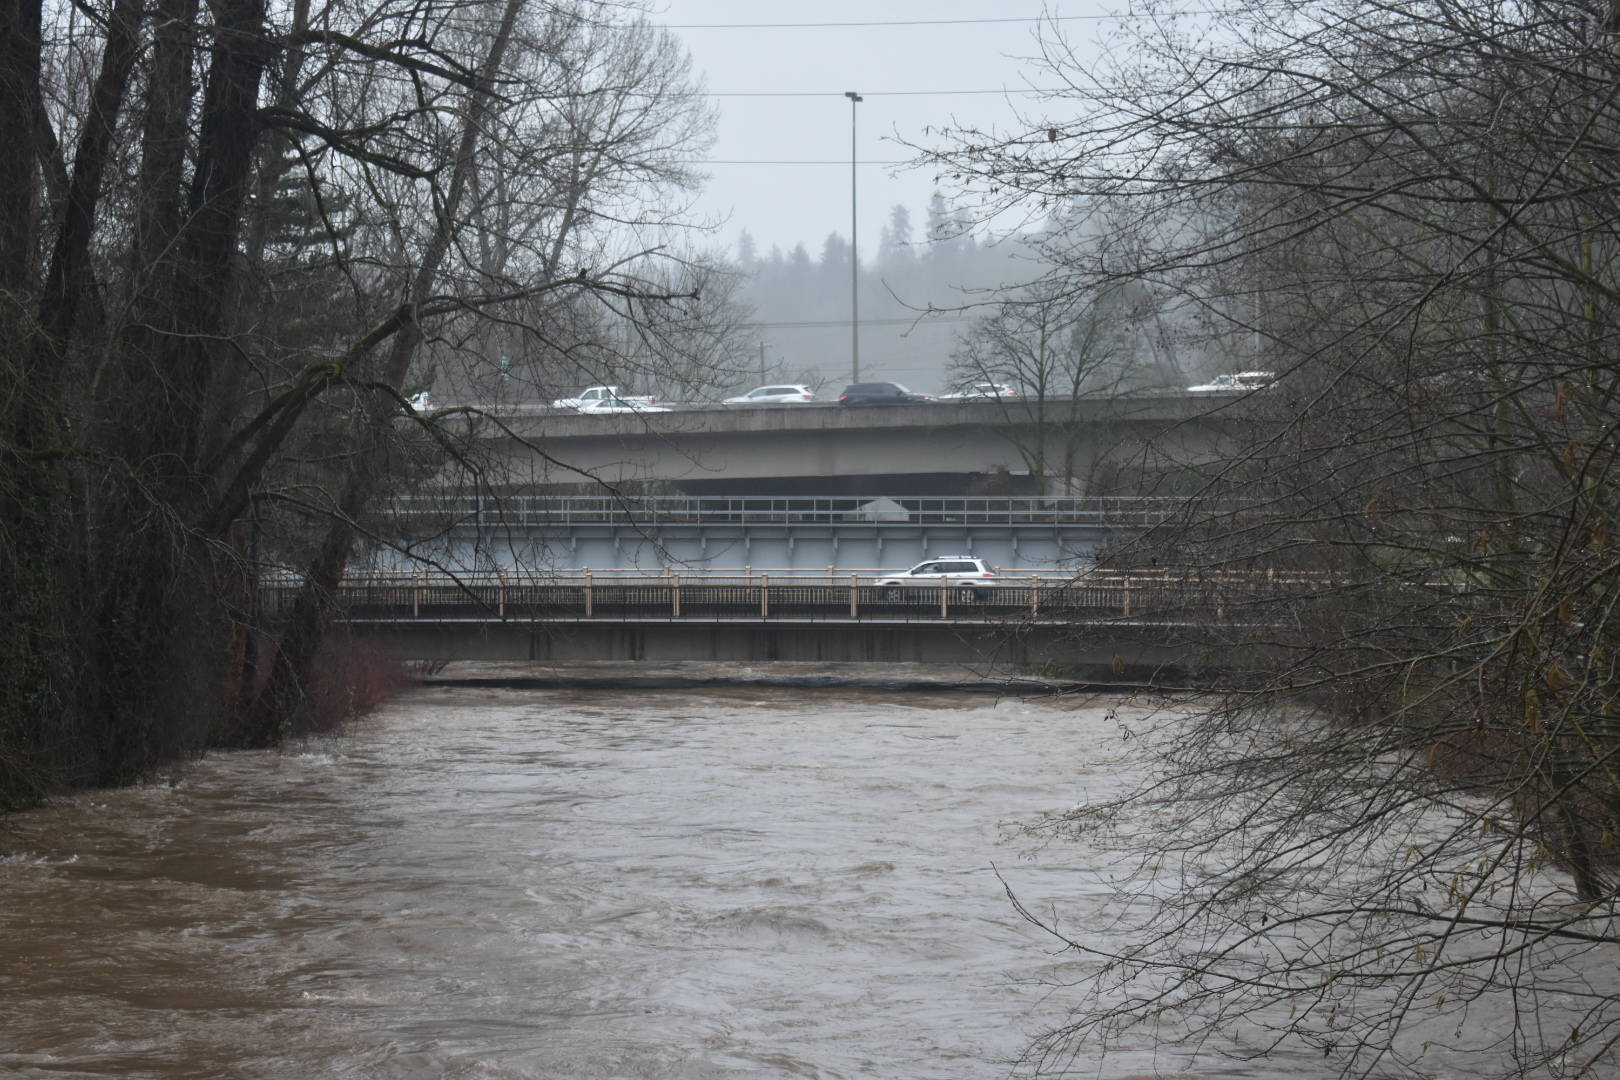 Photo by Haley Ausbun. The Cedar River was high as several streets in and near Renton faced closures due to flooding, Thursday, Feb. 6.